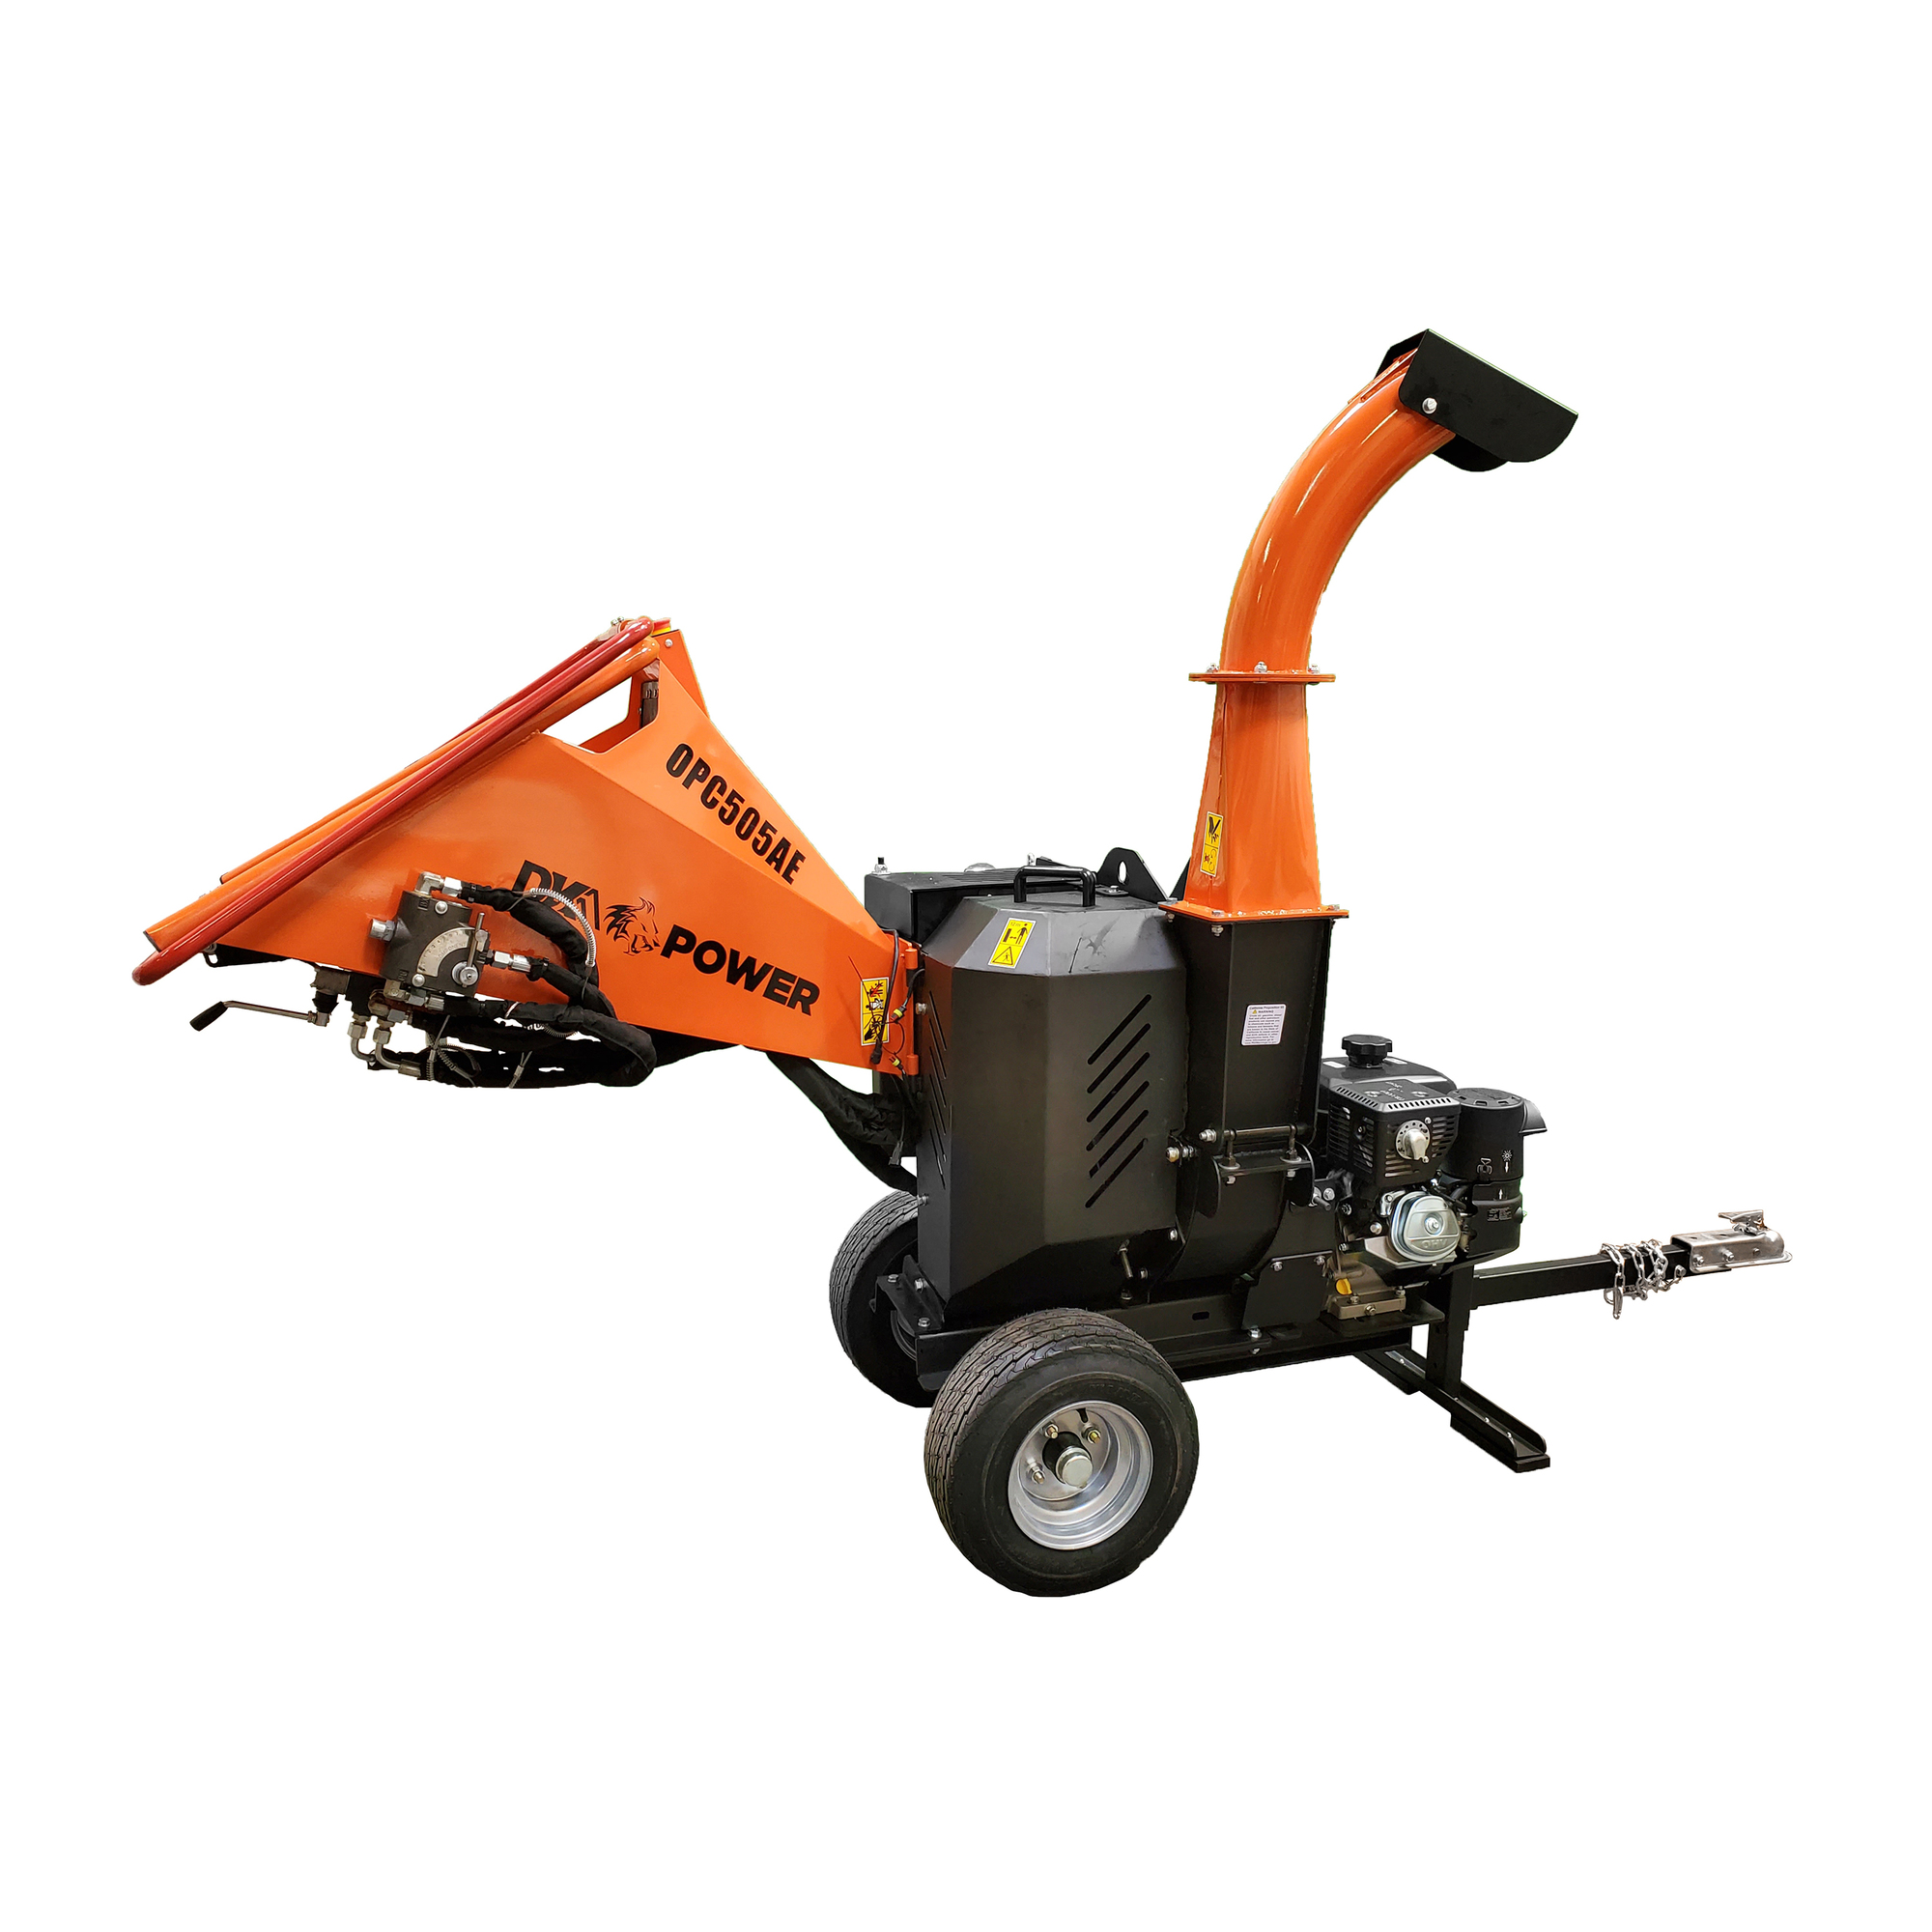 DK2 Power, 5Inch Auto-Feed Electric Start 14hp Disk Chipper, Engine Displacement 429 cc, Horsepower 14, Max. Cutting Thickness 5.25 in, Model OPC505AE